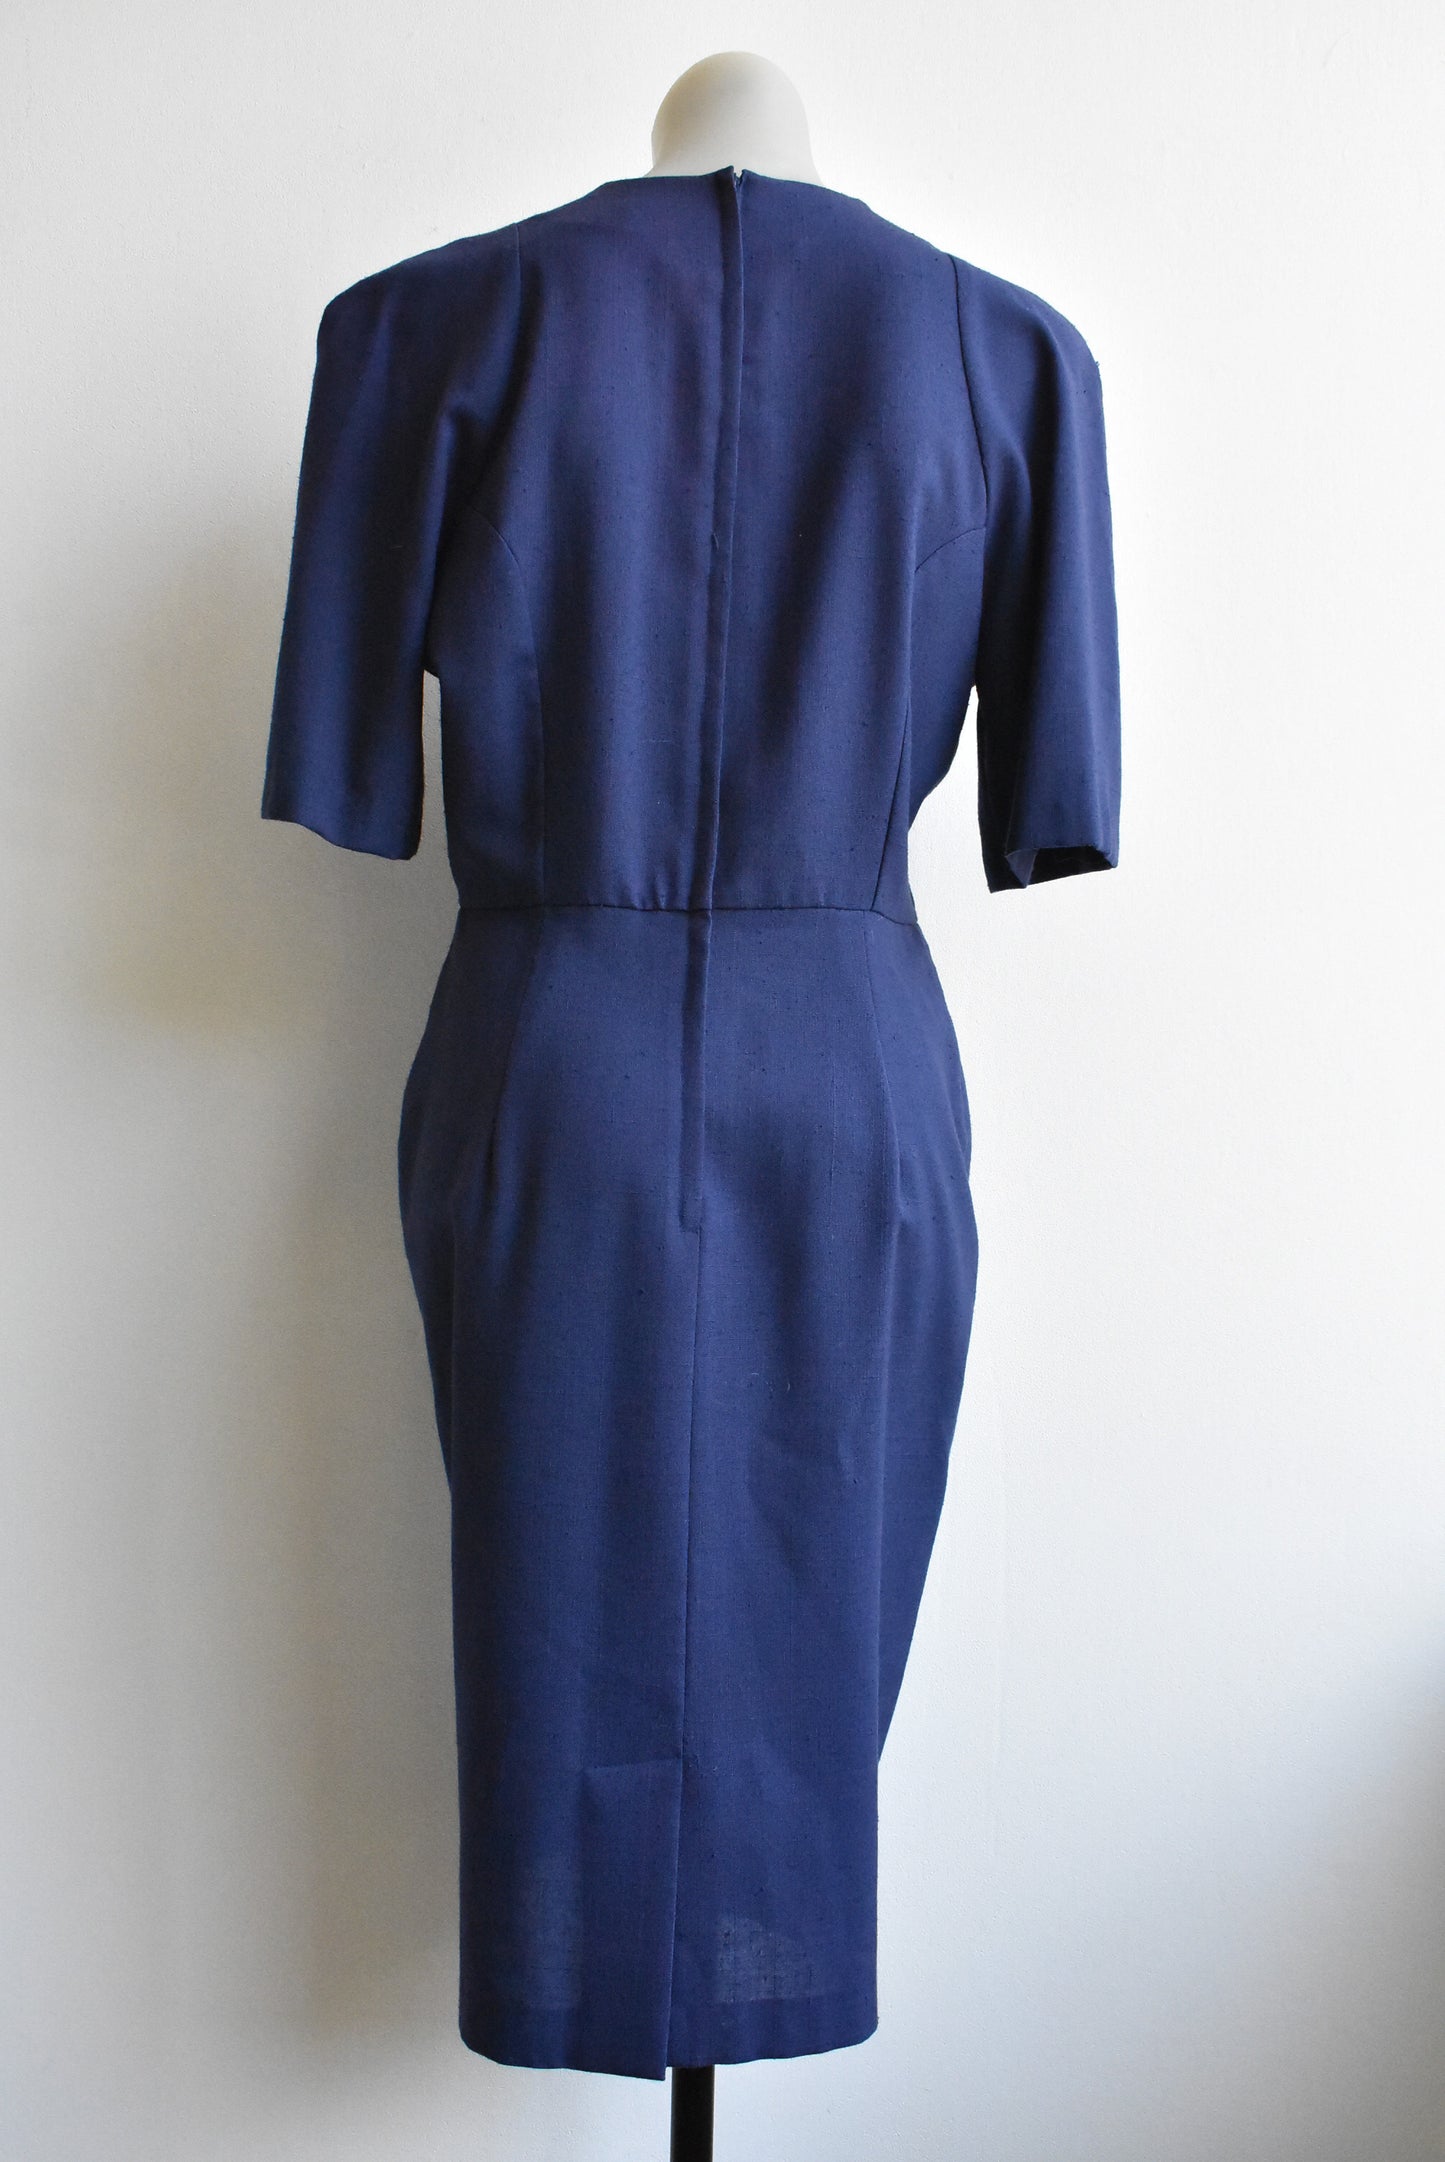 DS Dress, Made in New Zealand, size M